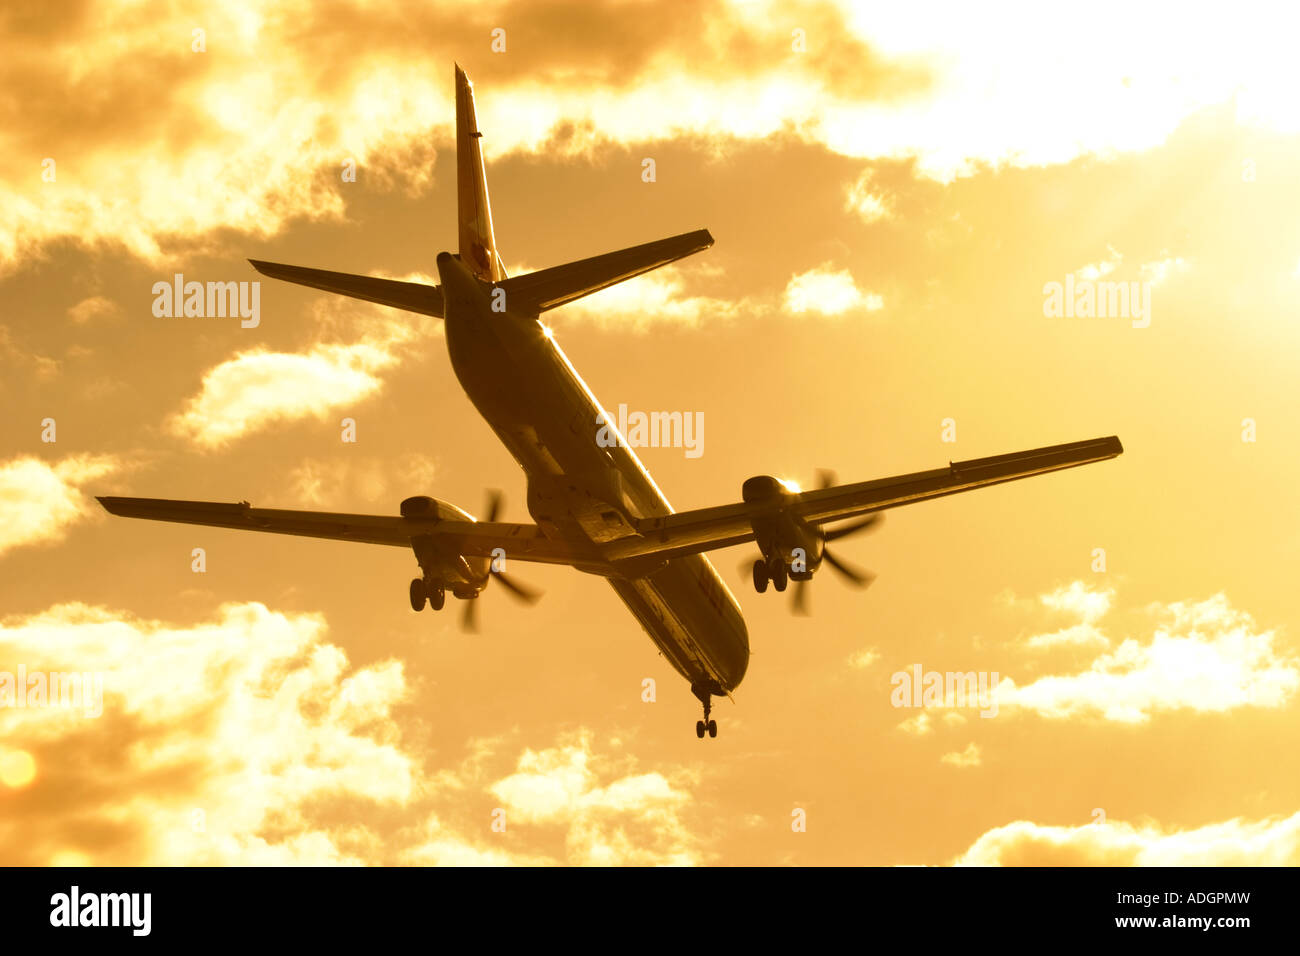 Regional airliner silhouette Stock Photo